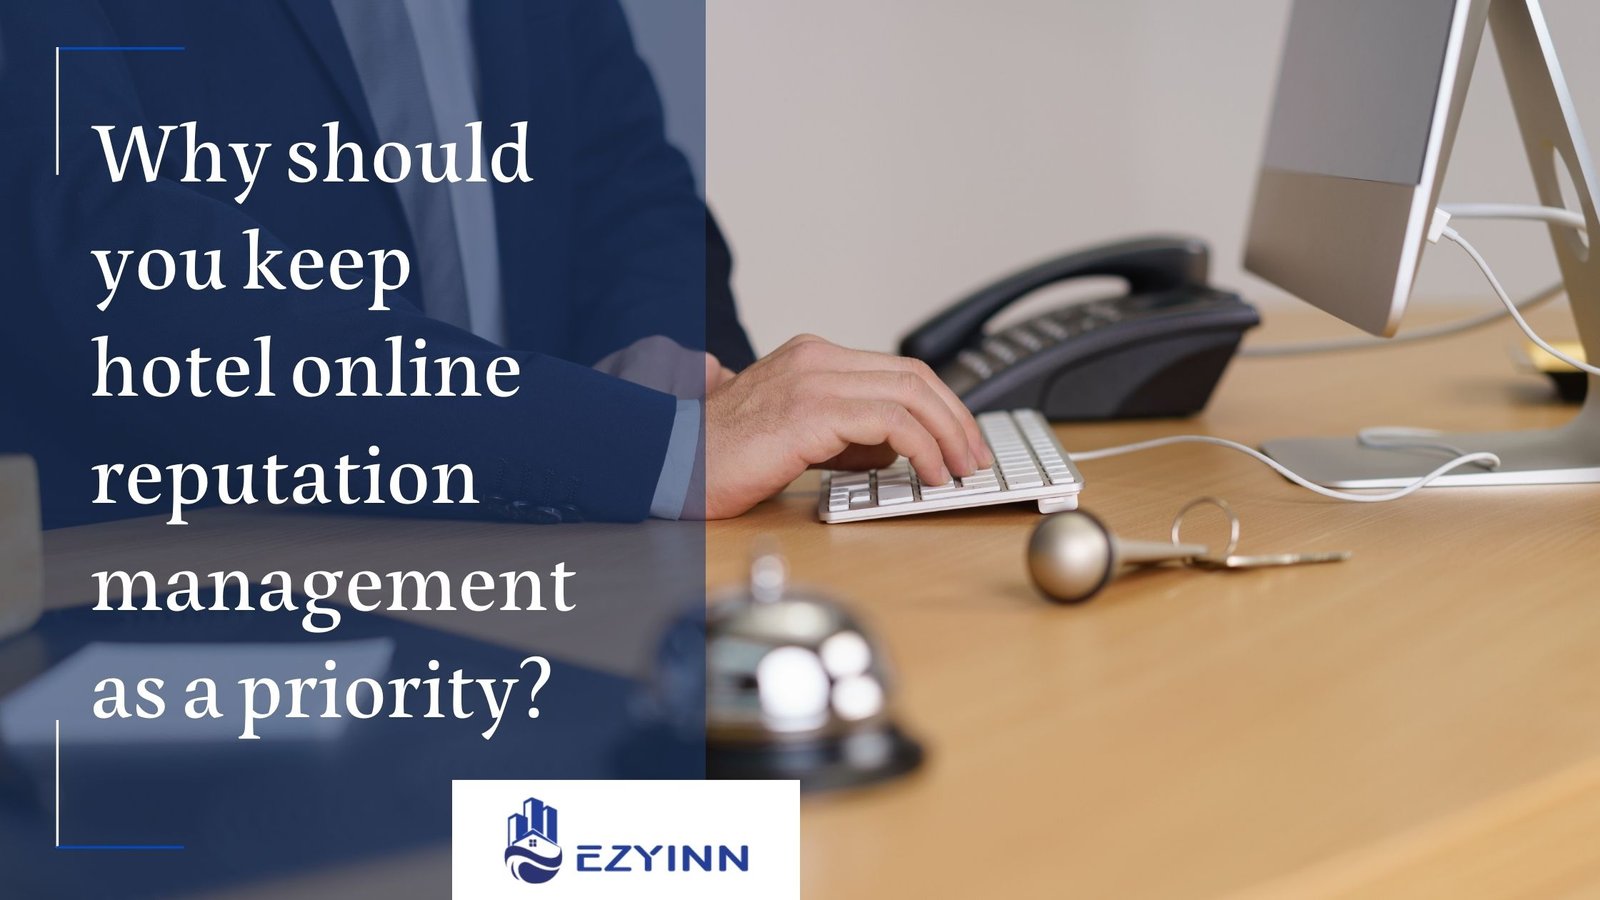 Why should you keep hotel online reputation management as a priority | Ezyinn PMS